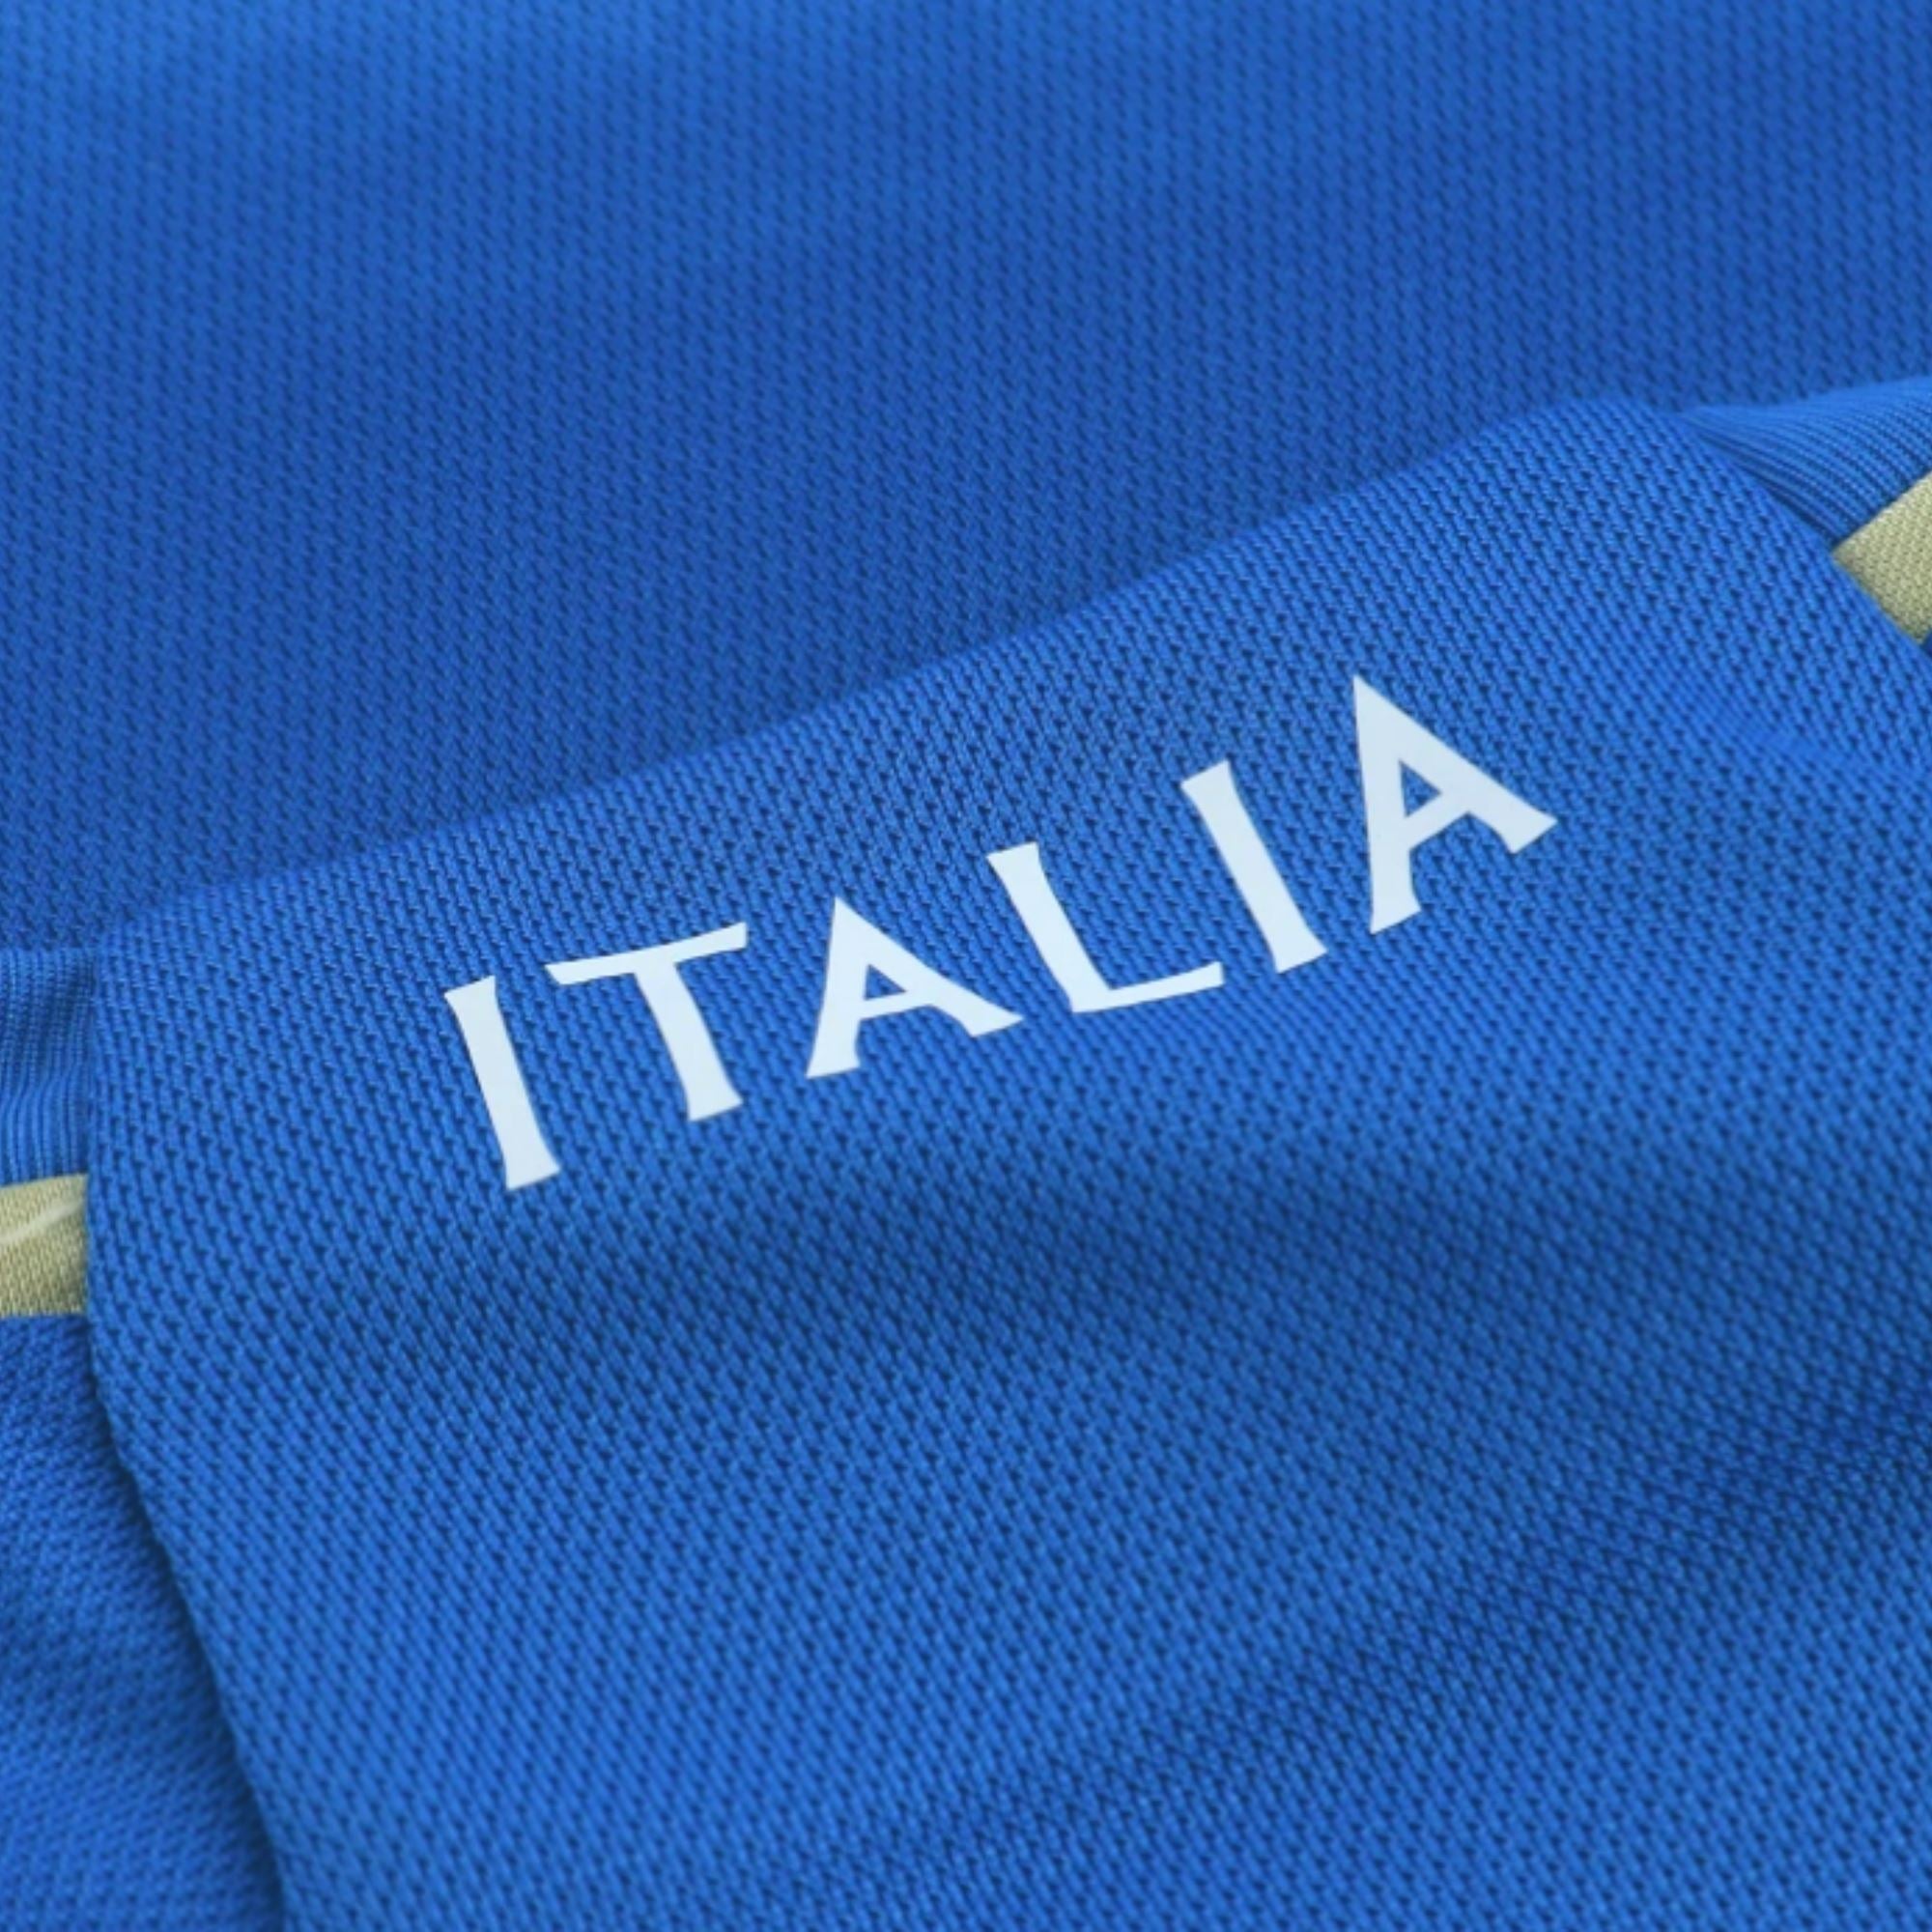 New Italy Home Jersey 2023/24 Customised - ITASPORT